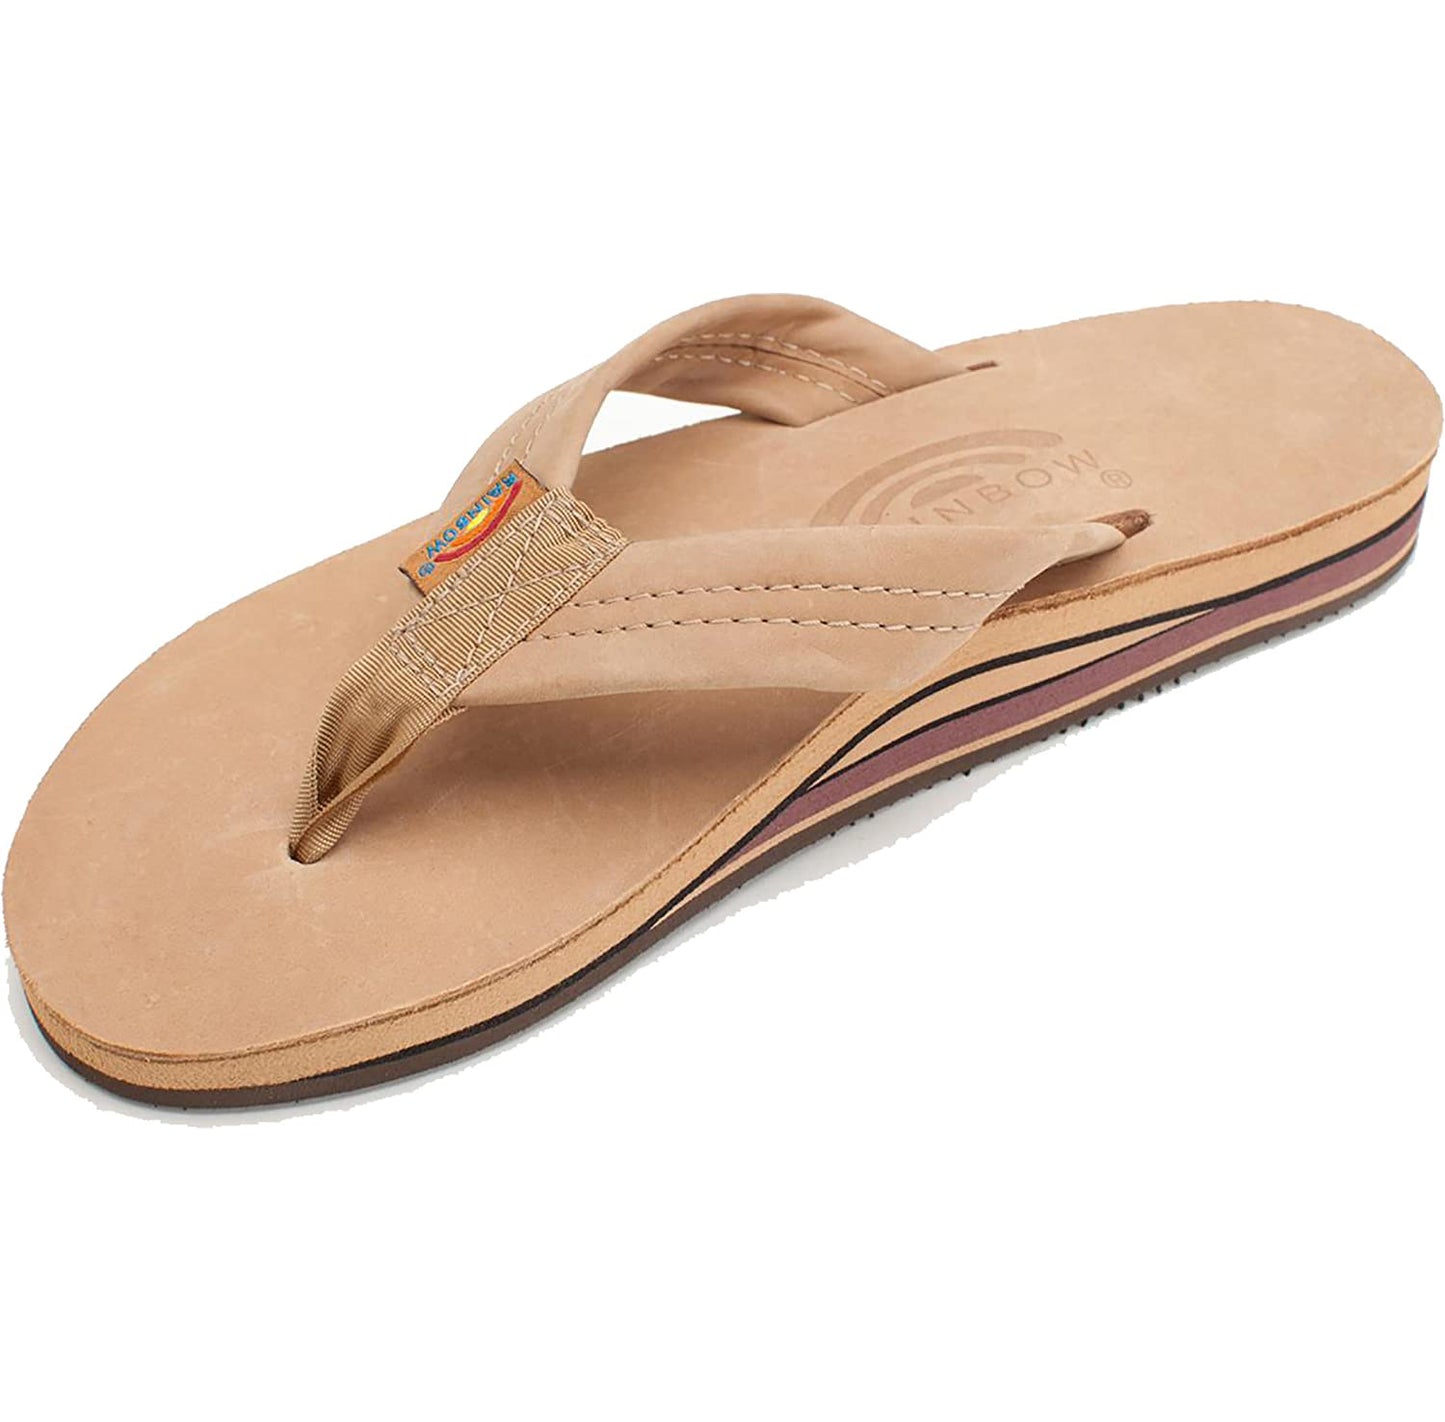 Rainbow Sandals Women's Double Layer Premier Leather with Arch Support Sierra Brown Leather 302ALTS0SRBRL Womens Footwear